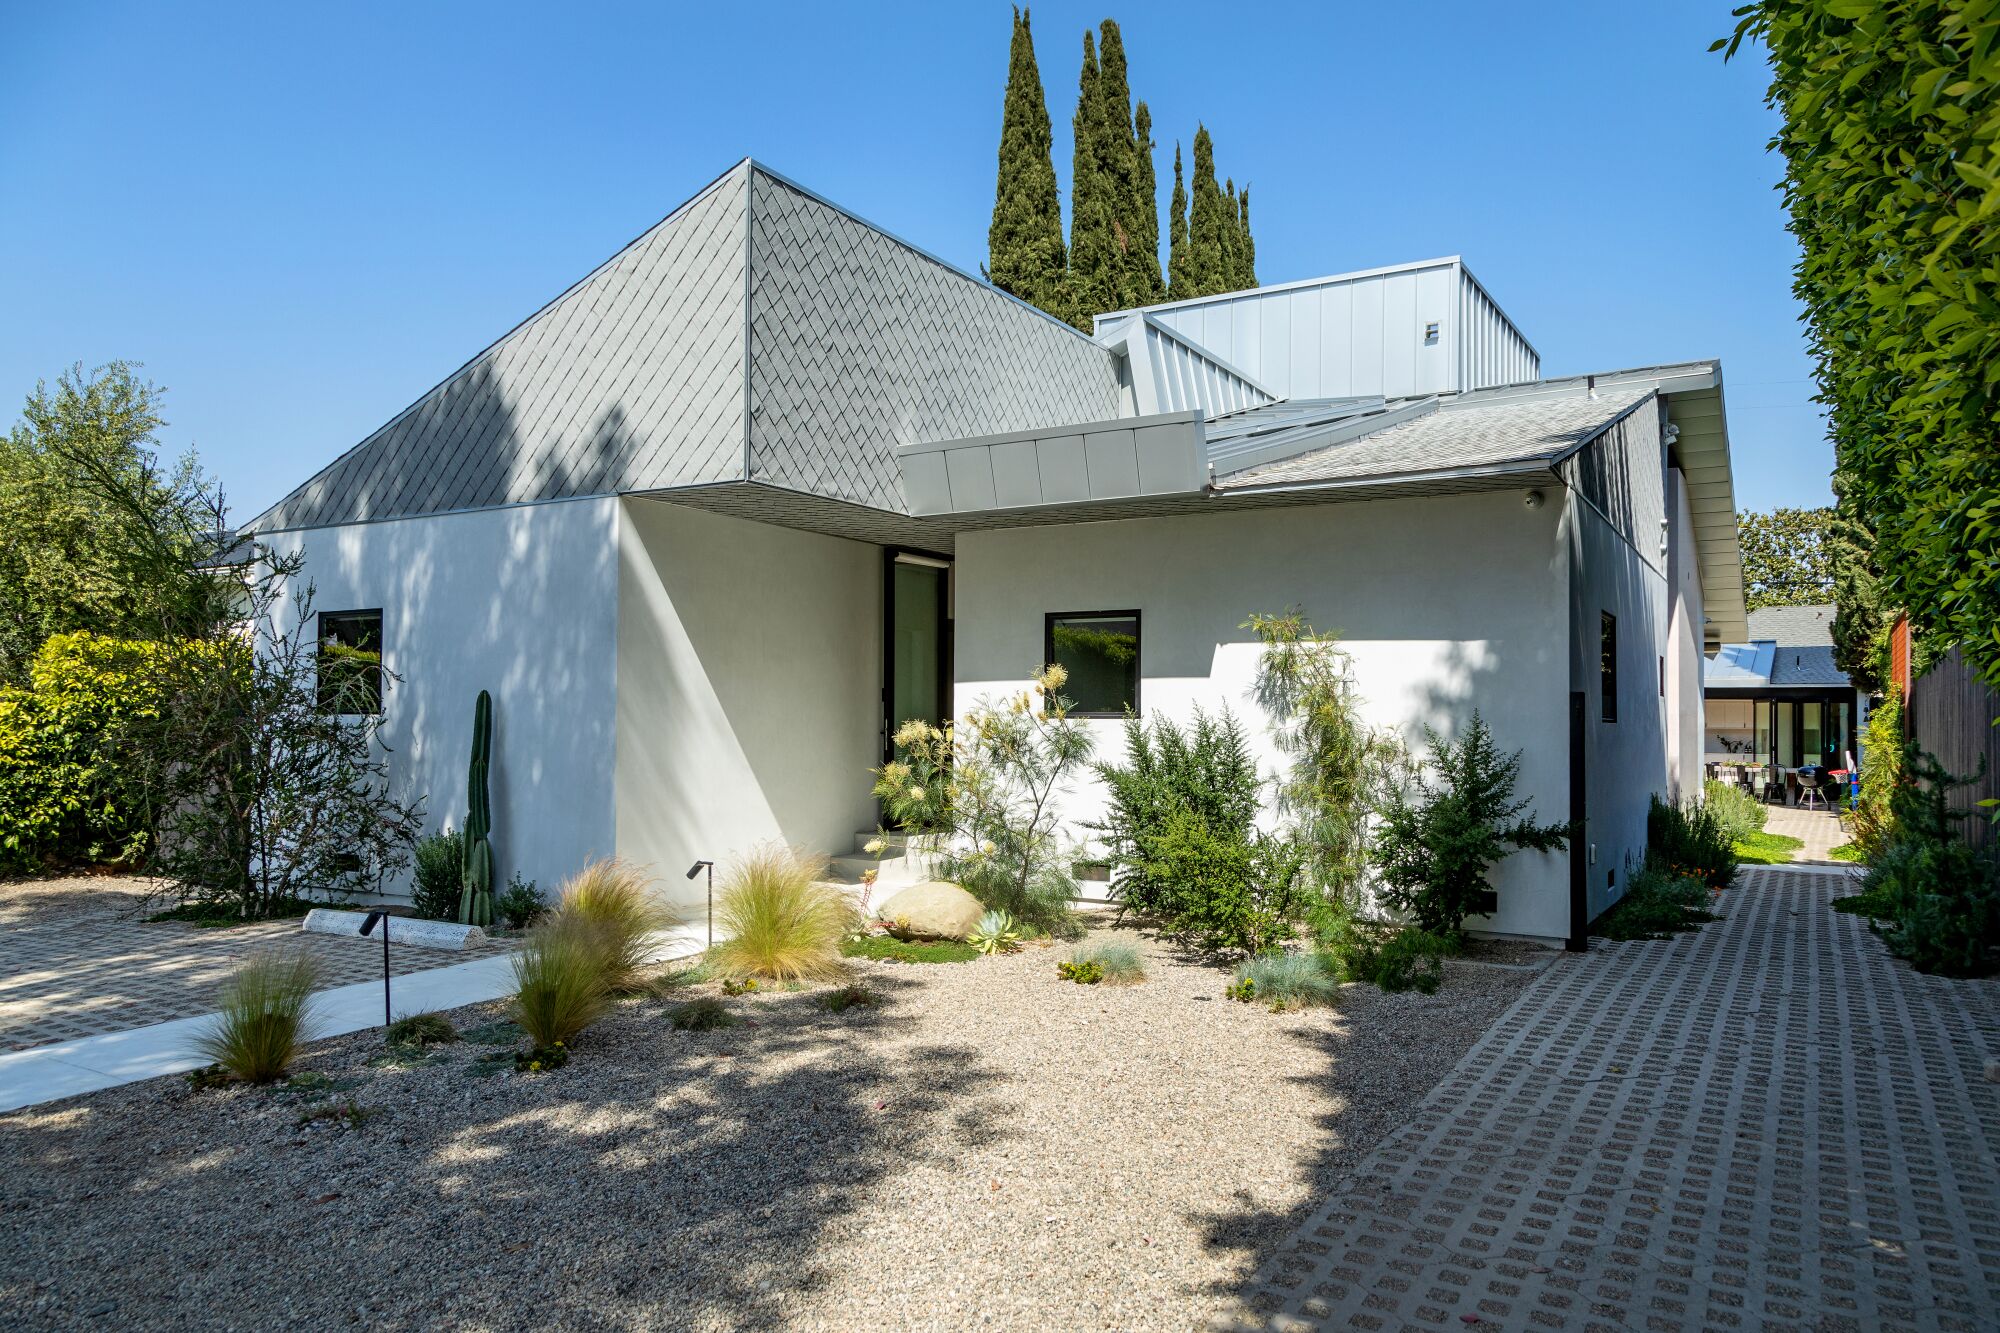 A contemporary home with a modern, geometric roofline